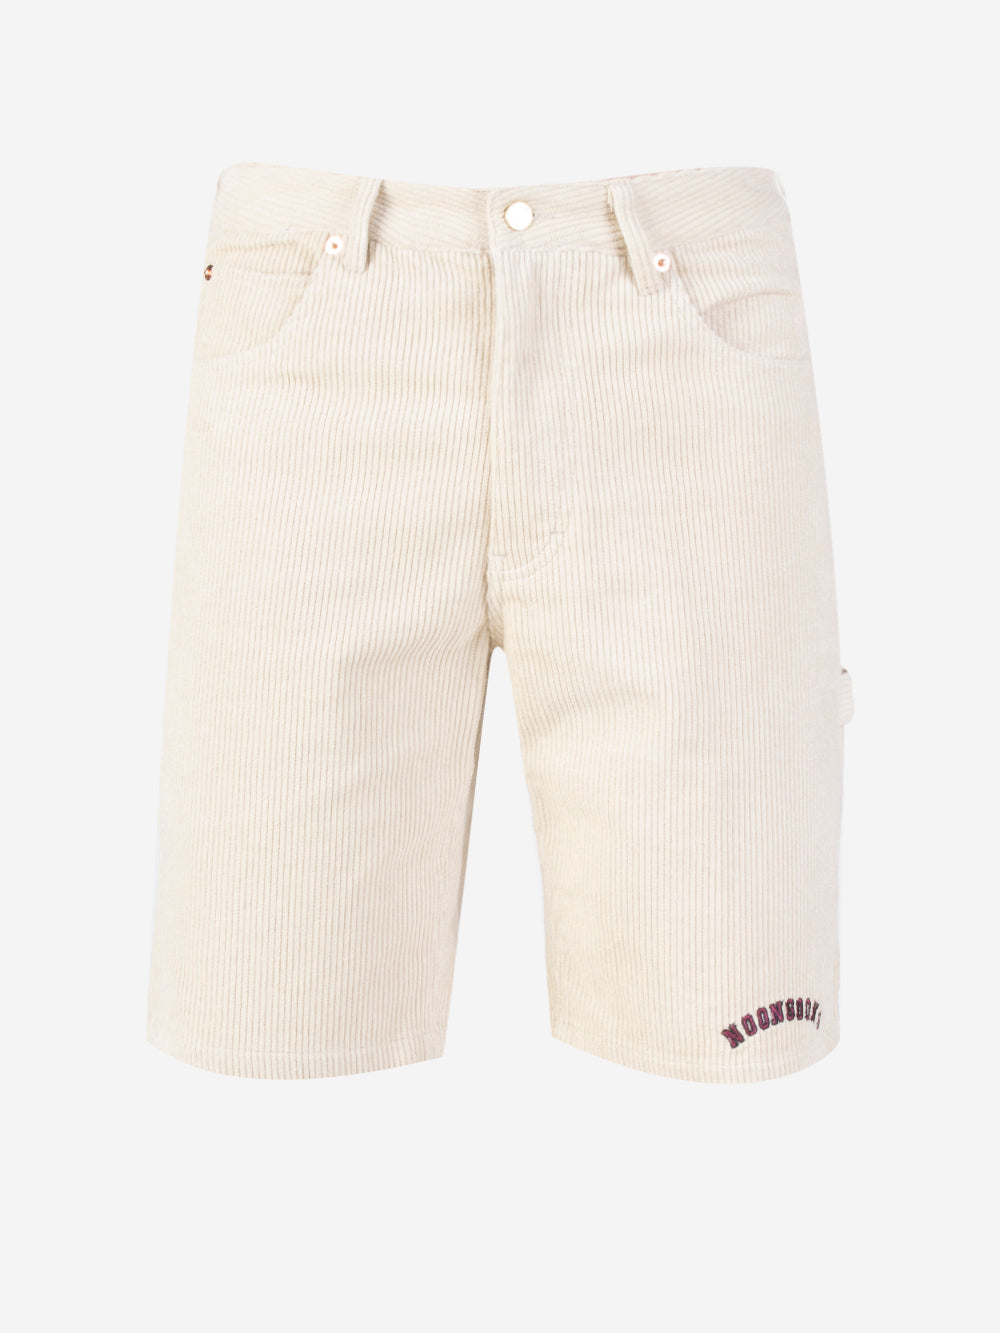 NOON GOONS Sublime Cord Shorts NGSS22002